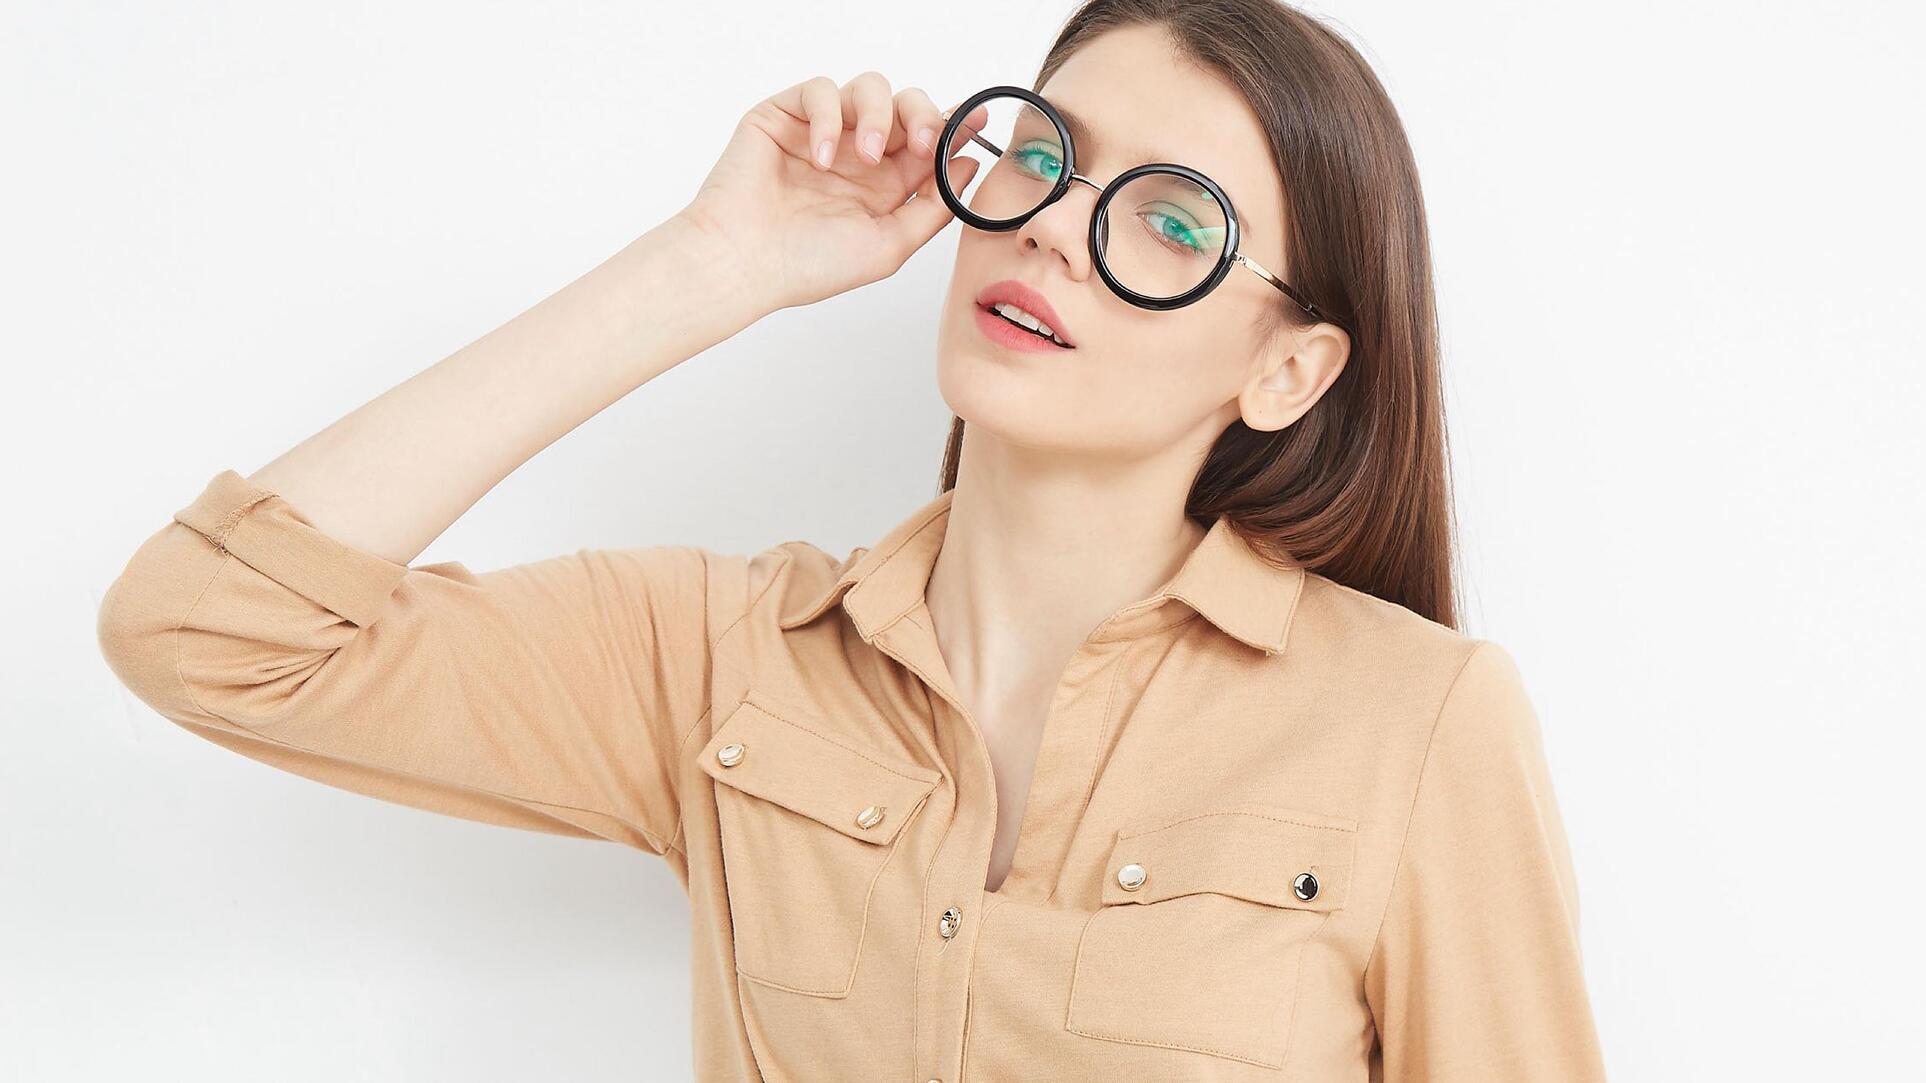 Fashion glasses add sophistication to your wardrobe.